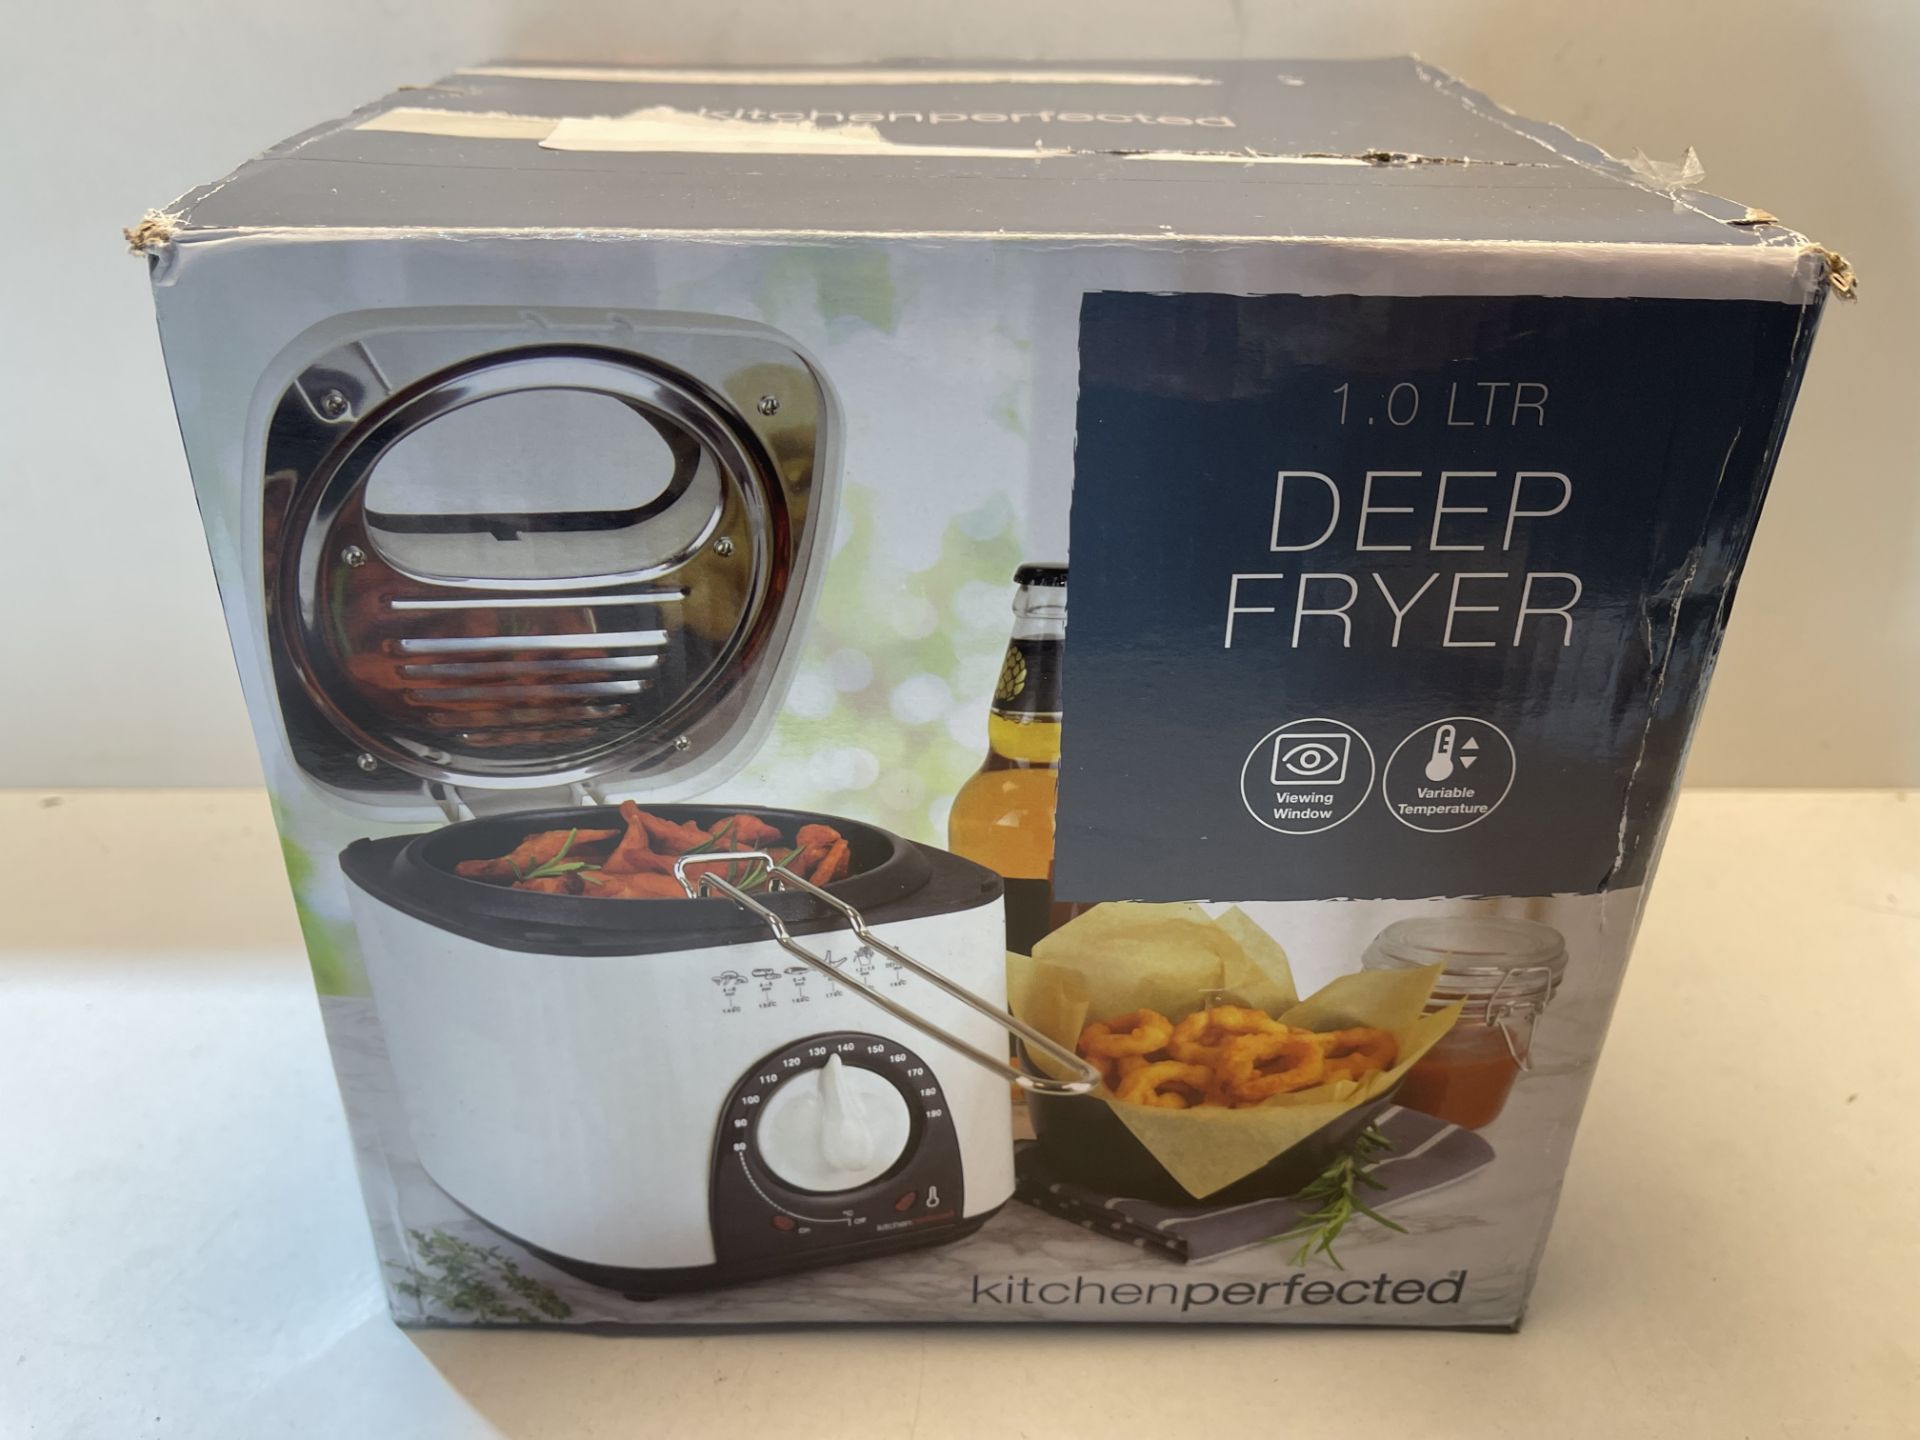 KitchenPerfected 1.0Ltr Compact Deep Fryer / Non-Stick / Thermostat Control / Frying Basket With